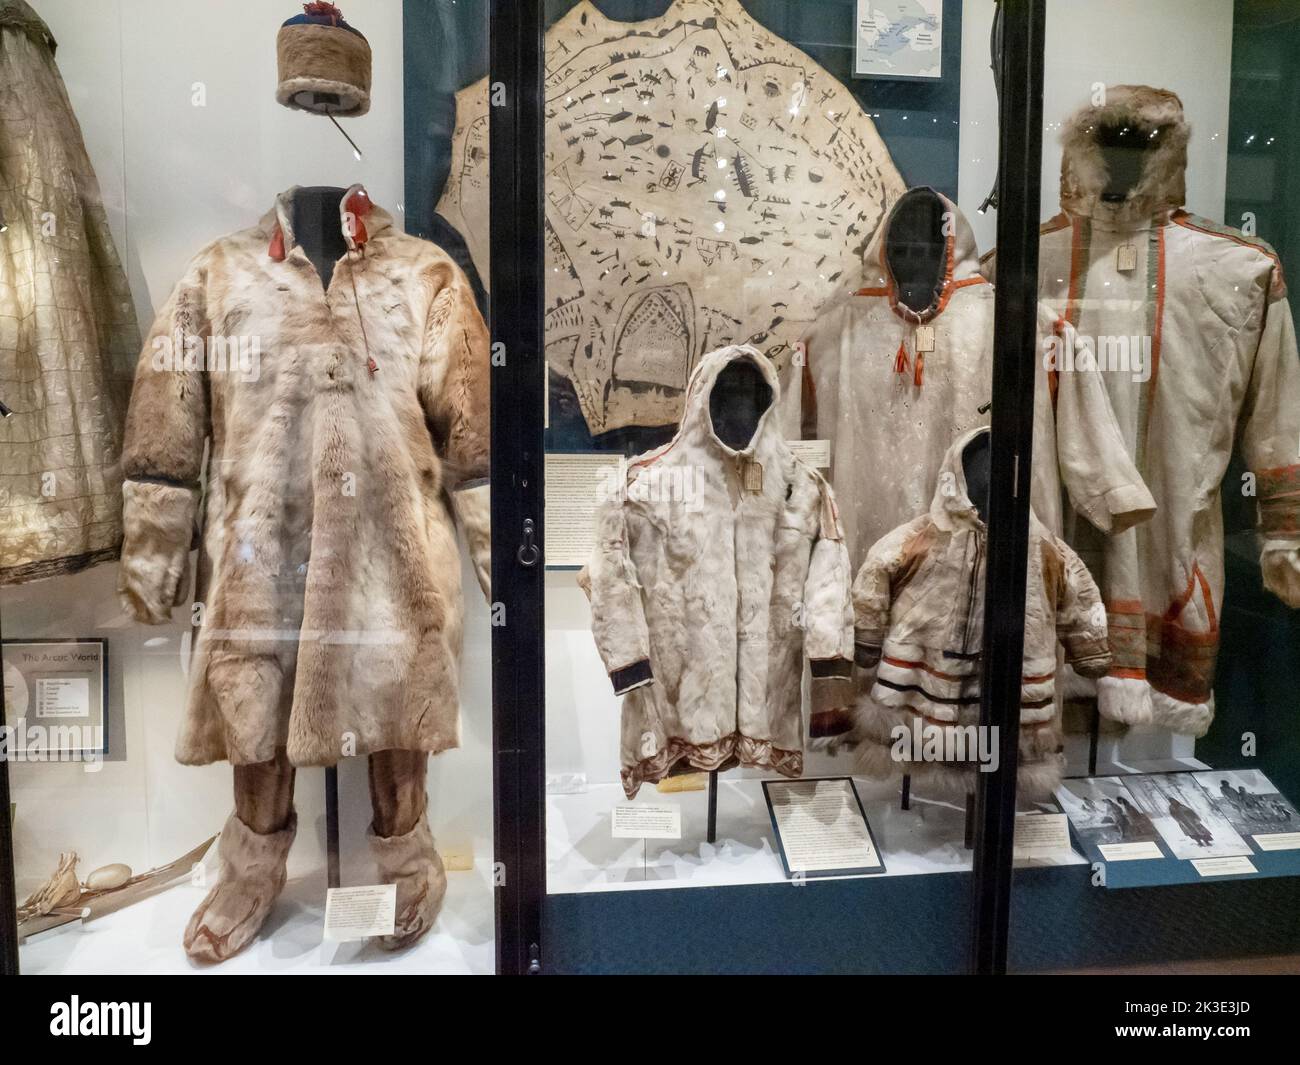 Native American clothing in the Pitt Rivers Museum, Oxford, Oxfordshire, UK. Stock Photo